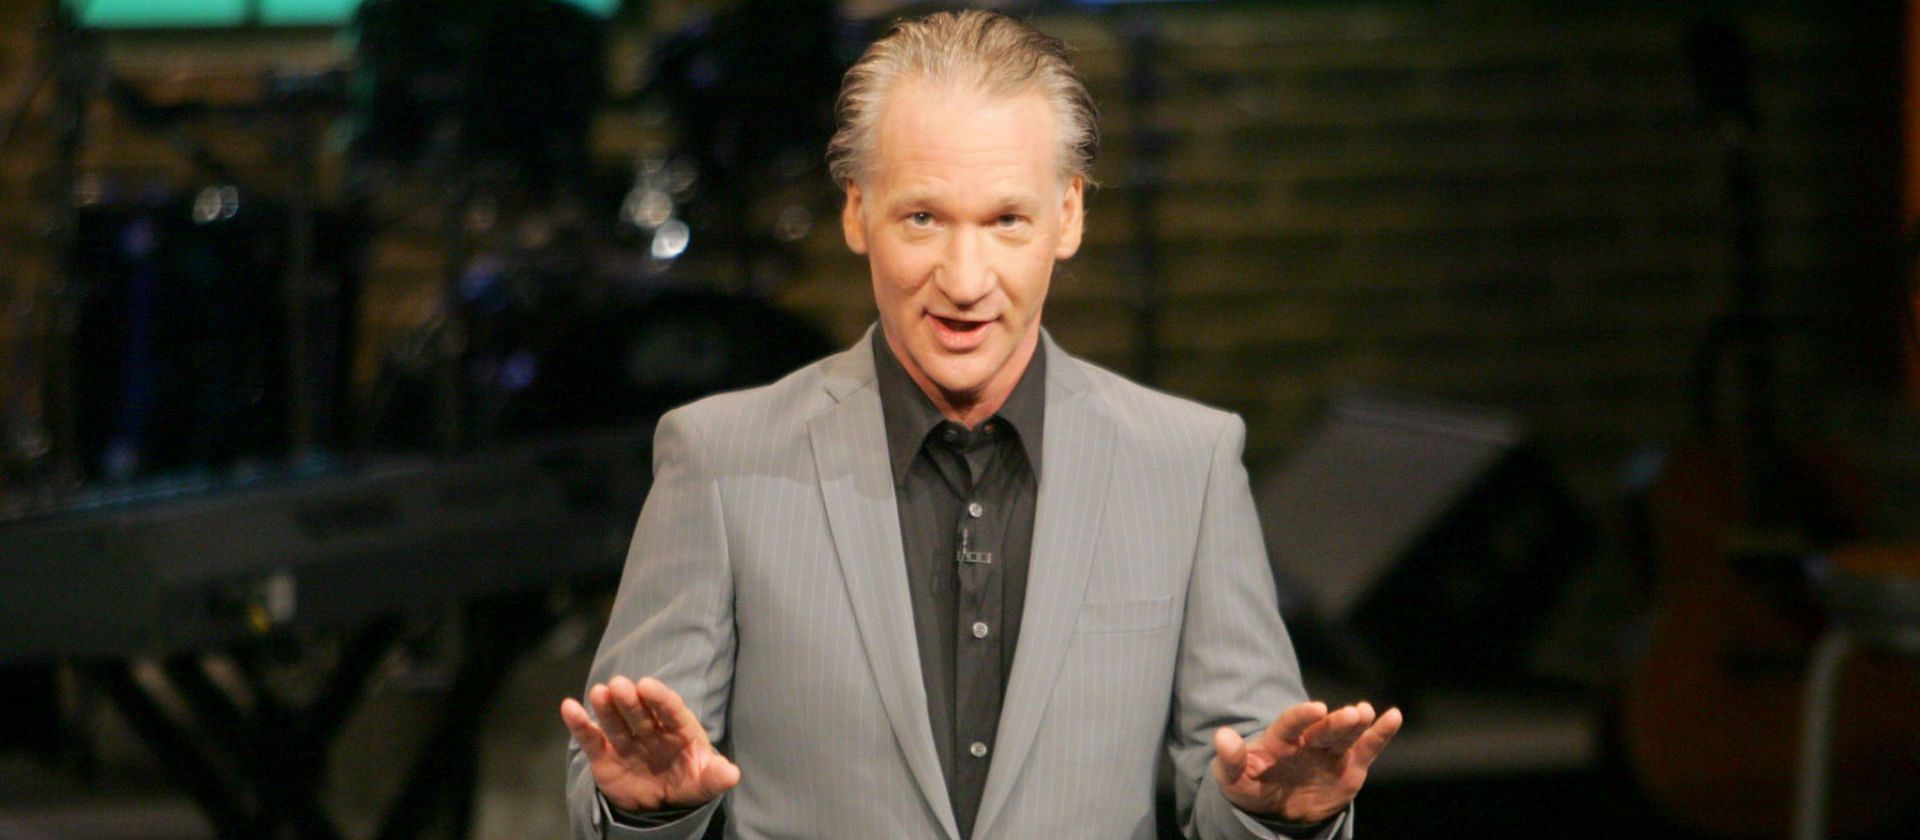 Bill Maher defended comedians in light of the Will Smith x Chris Rock Oscars controversy (Image via John Shearer/WireImage)